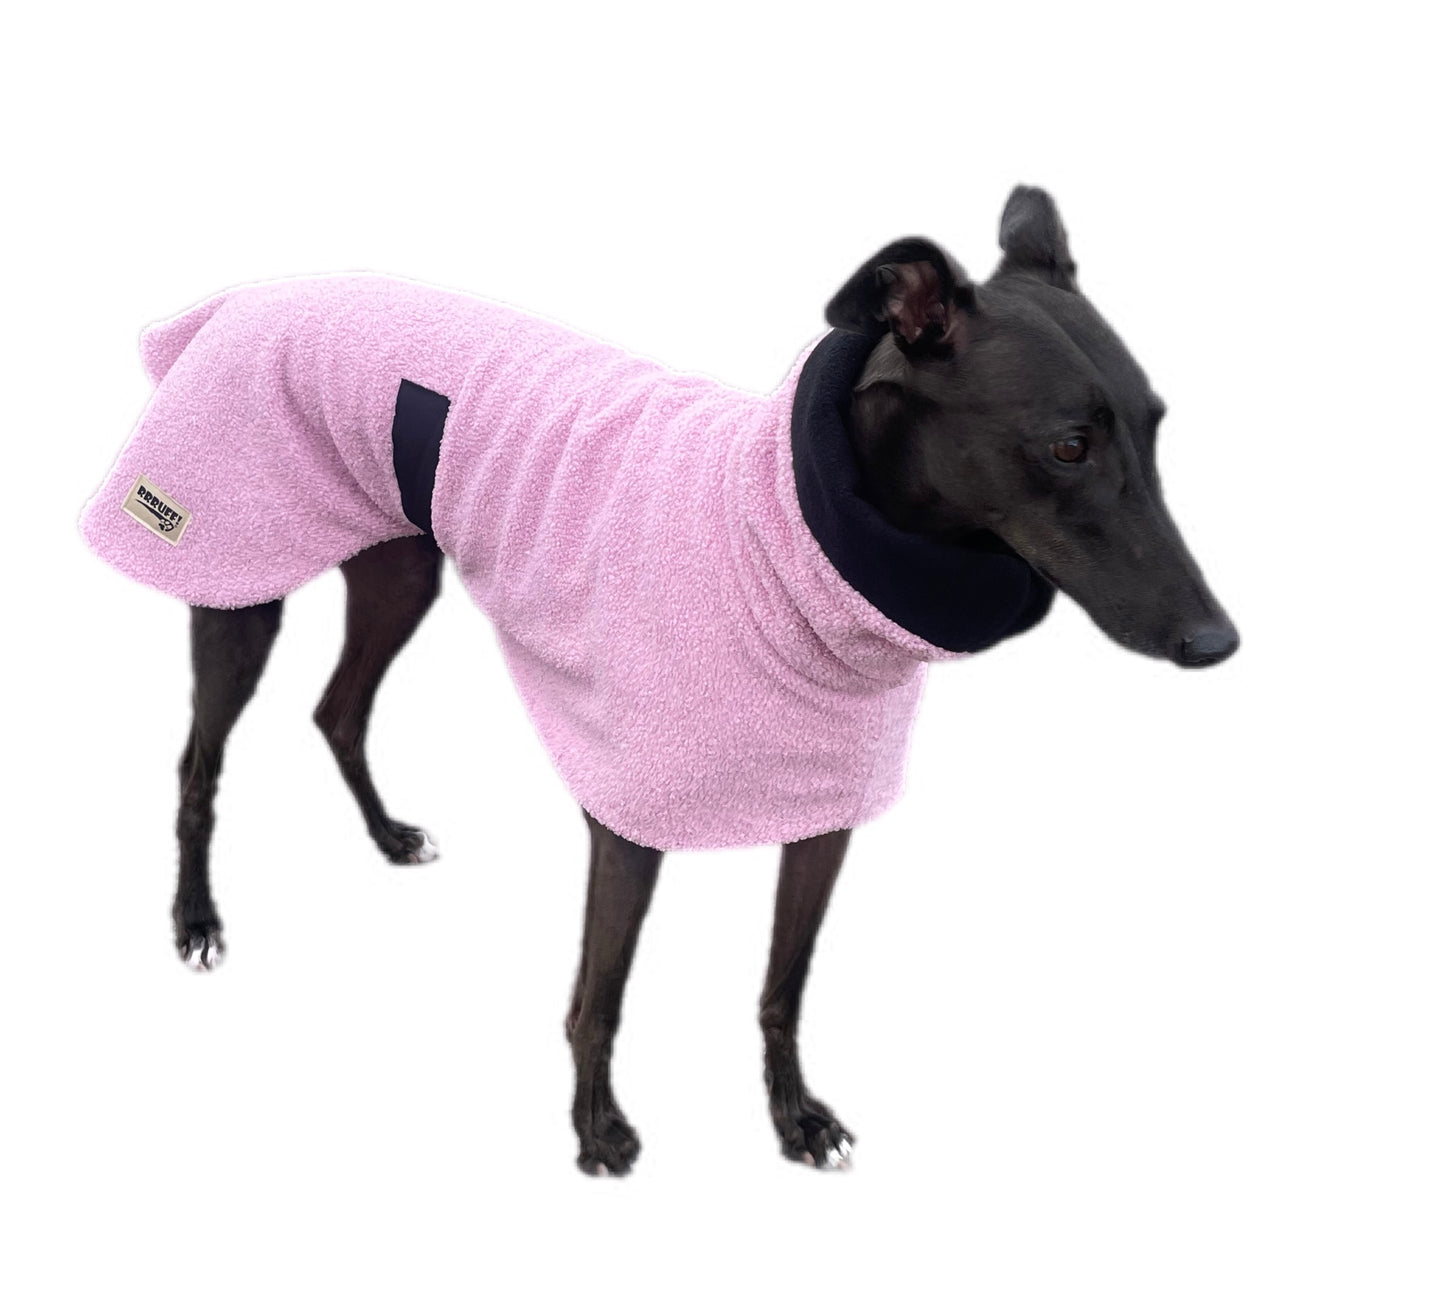 Pink blush Teddy fleece extra thick deluxe style greyhound coat with snuggly wide neck roll